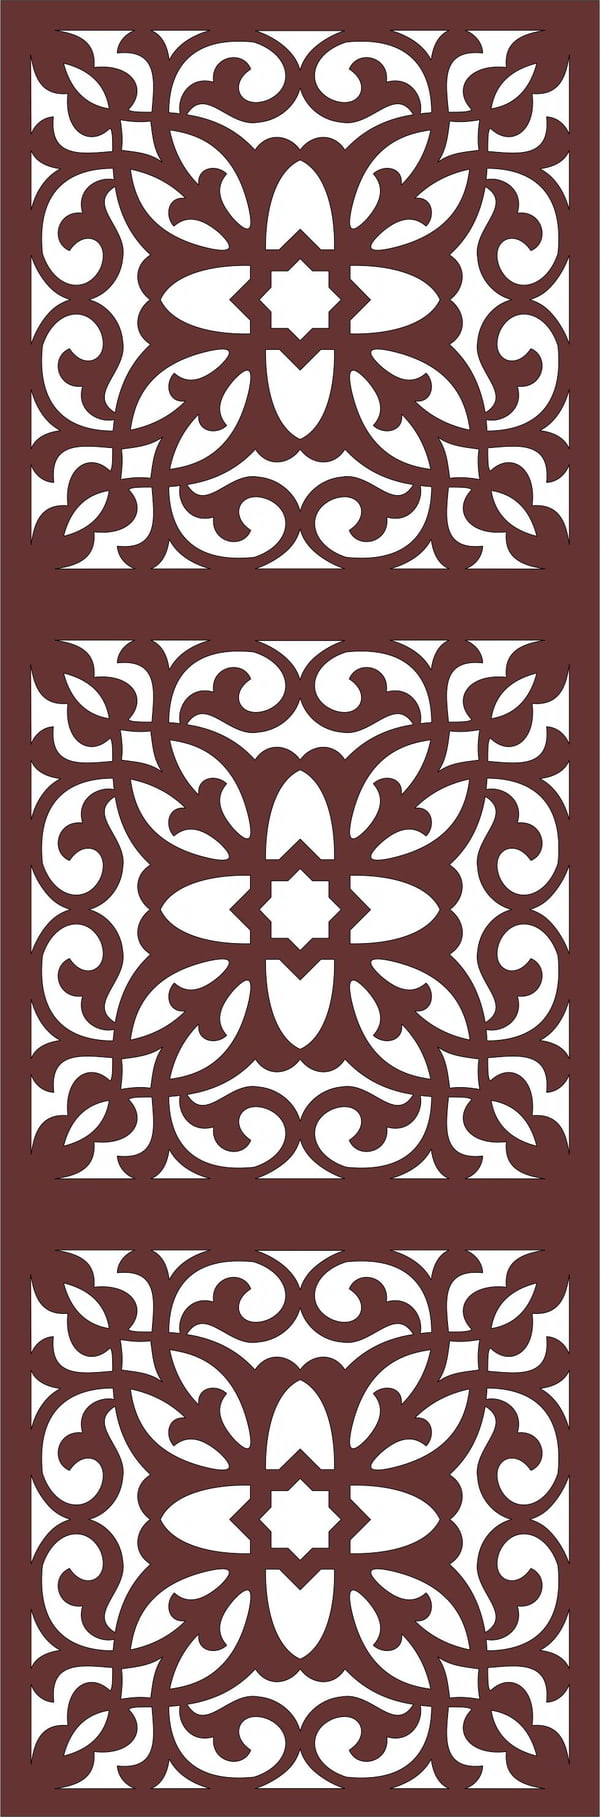 Laser Cut Decor Seamless Separator Grill Download Free Vector